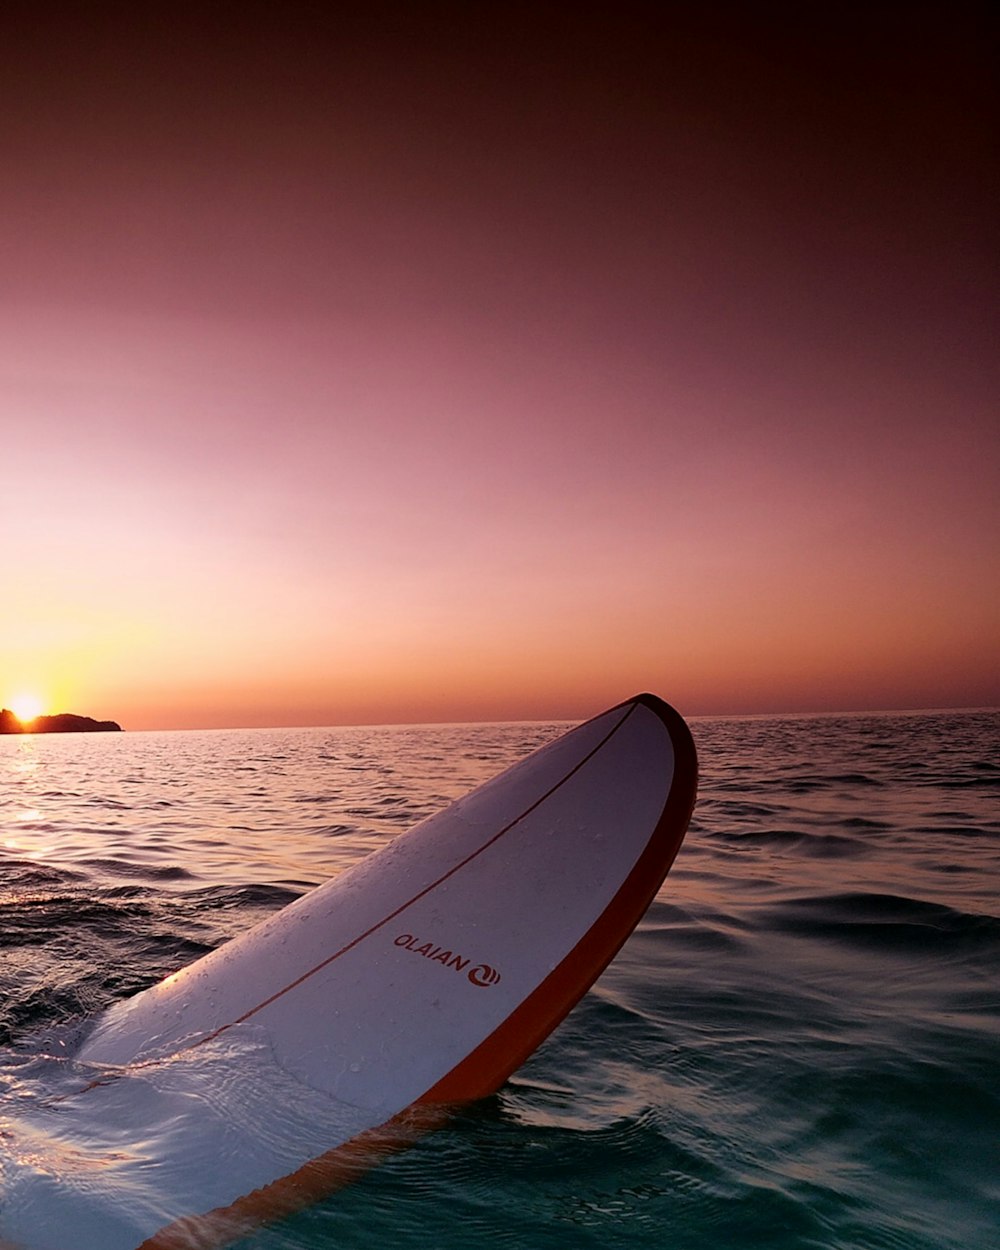 white and blue surfboard on sea during sunset